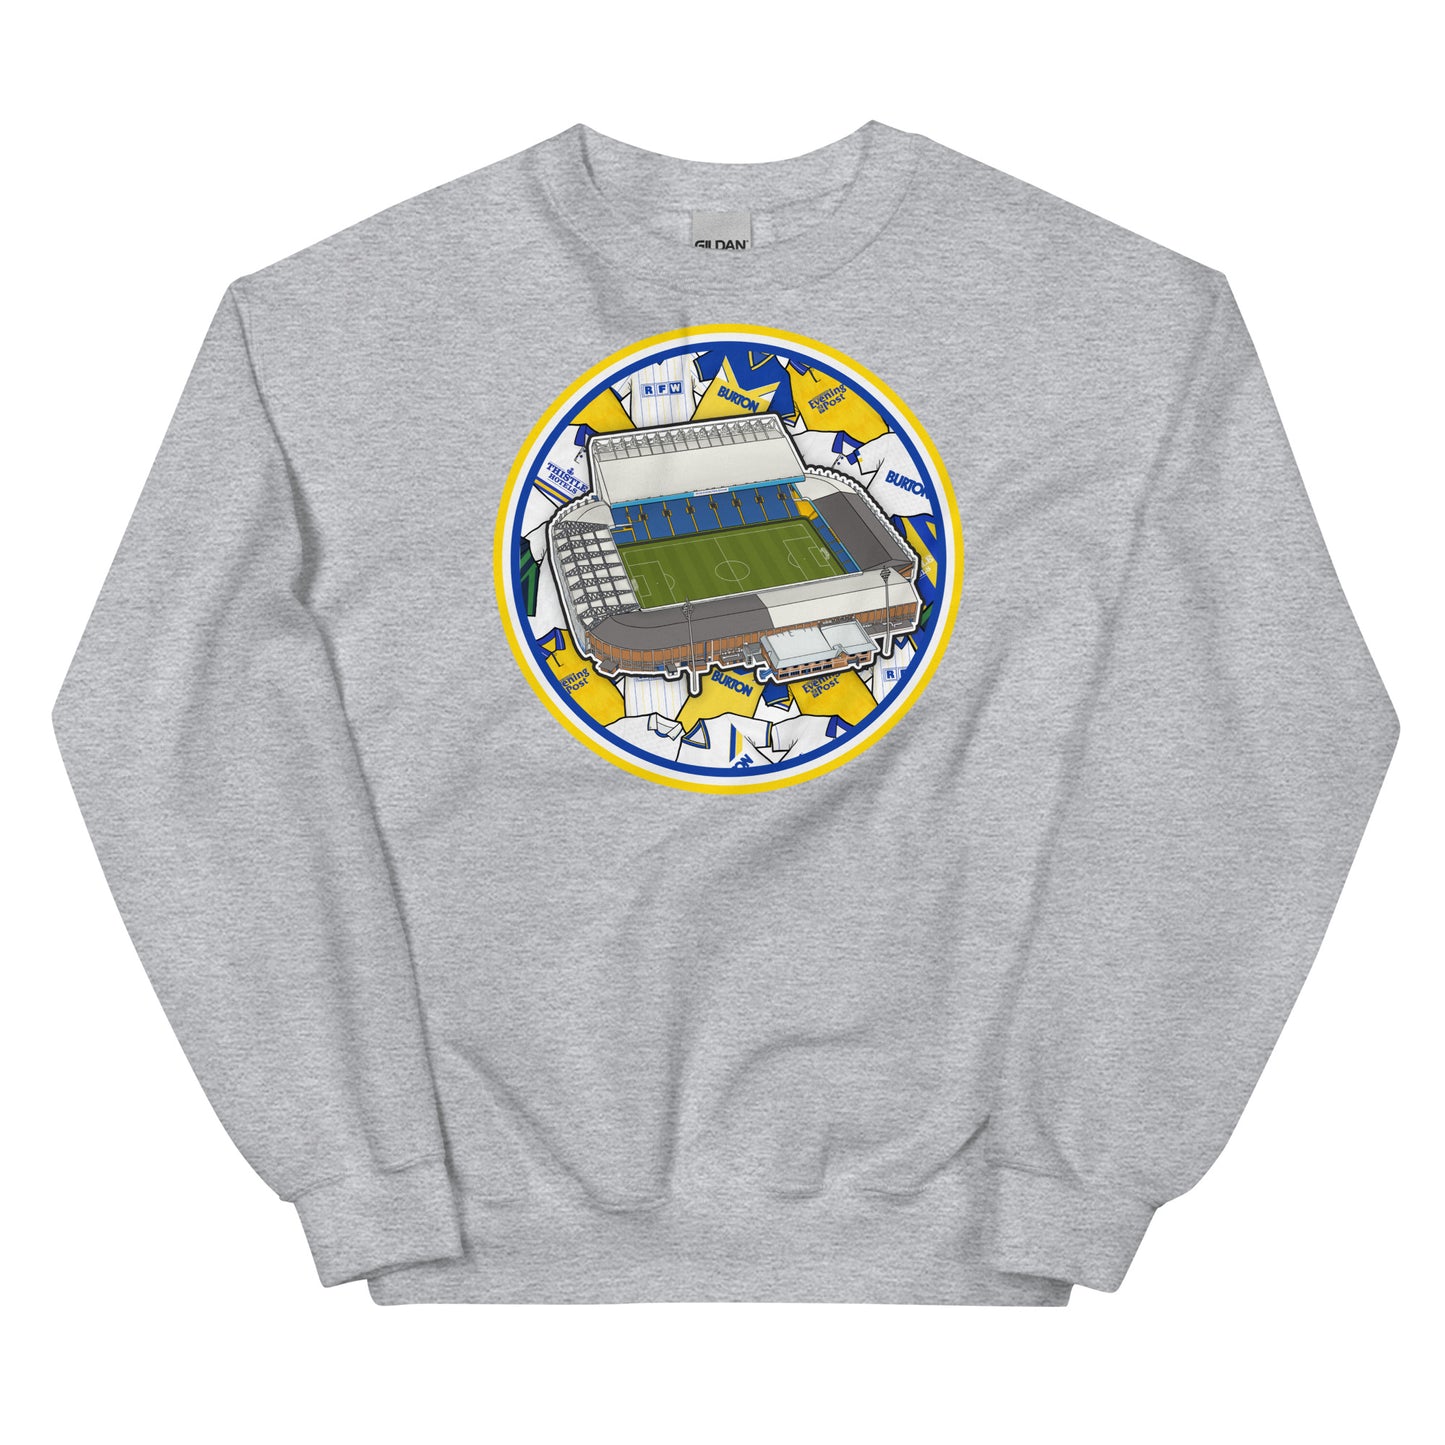 Grey Sweatshirt Inspired by the home of Leeds United in West Yorkshire, Elland Road Stadium with Retro Themed Illustrated Artwork Behind it